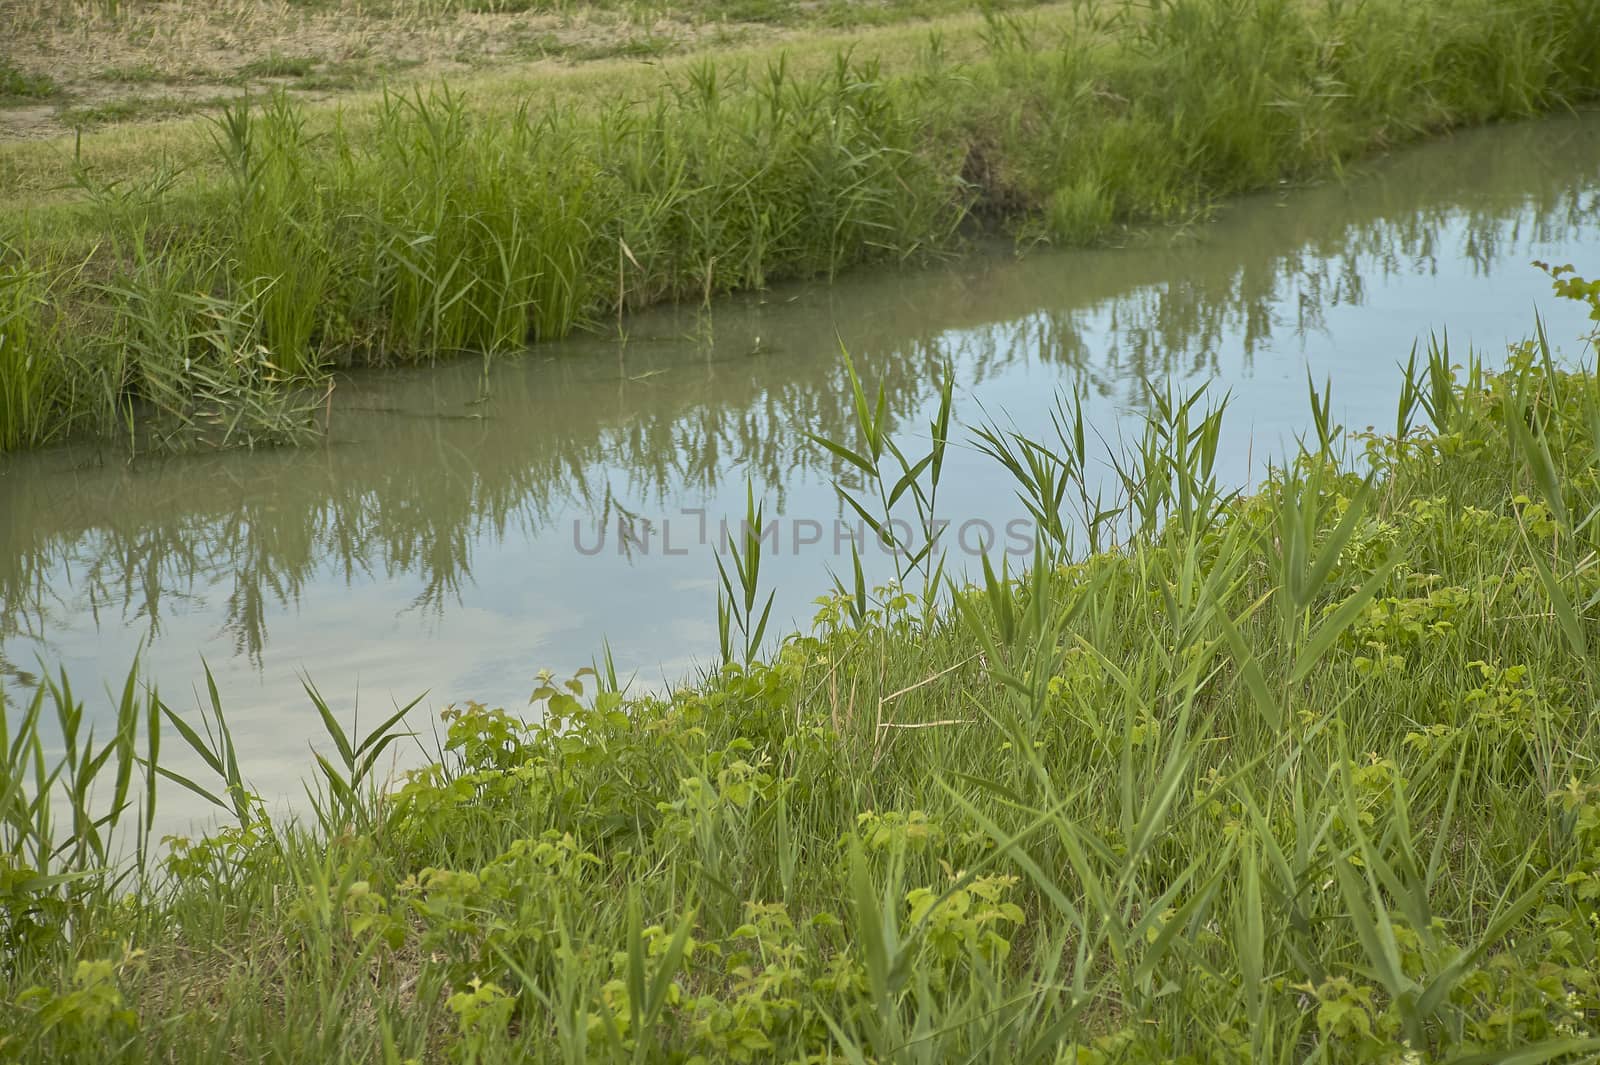 Shooting of a small ditch, stream, in a typical rural, rural area of the Padana plain used for irrigation of fields.